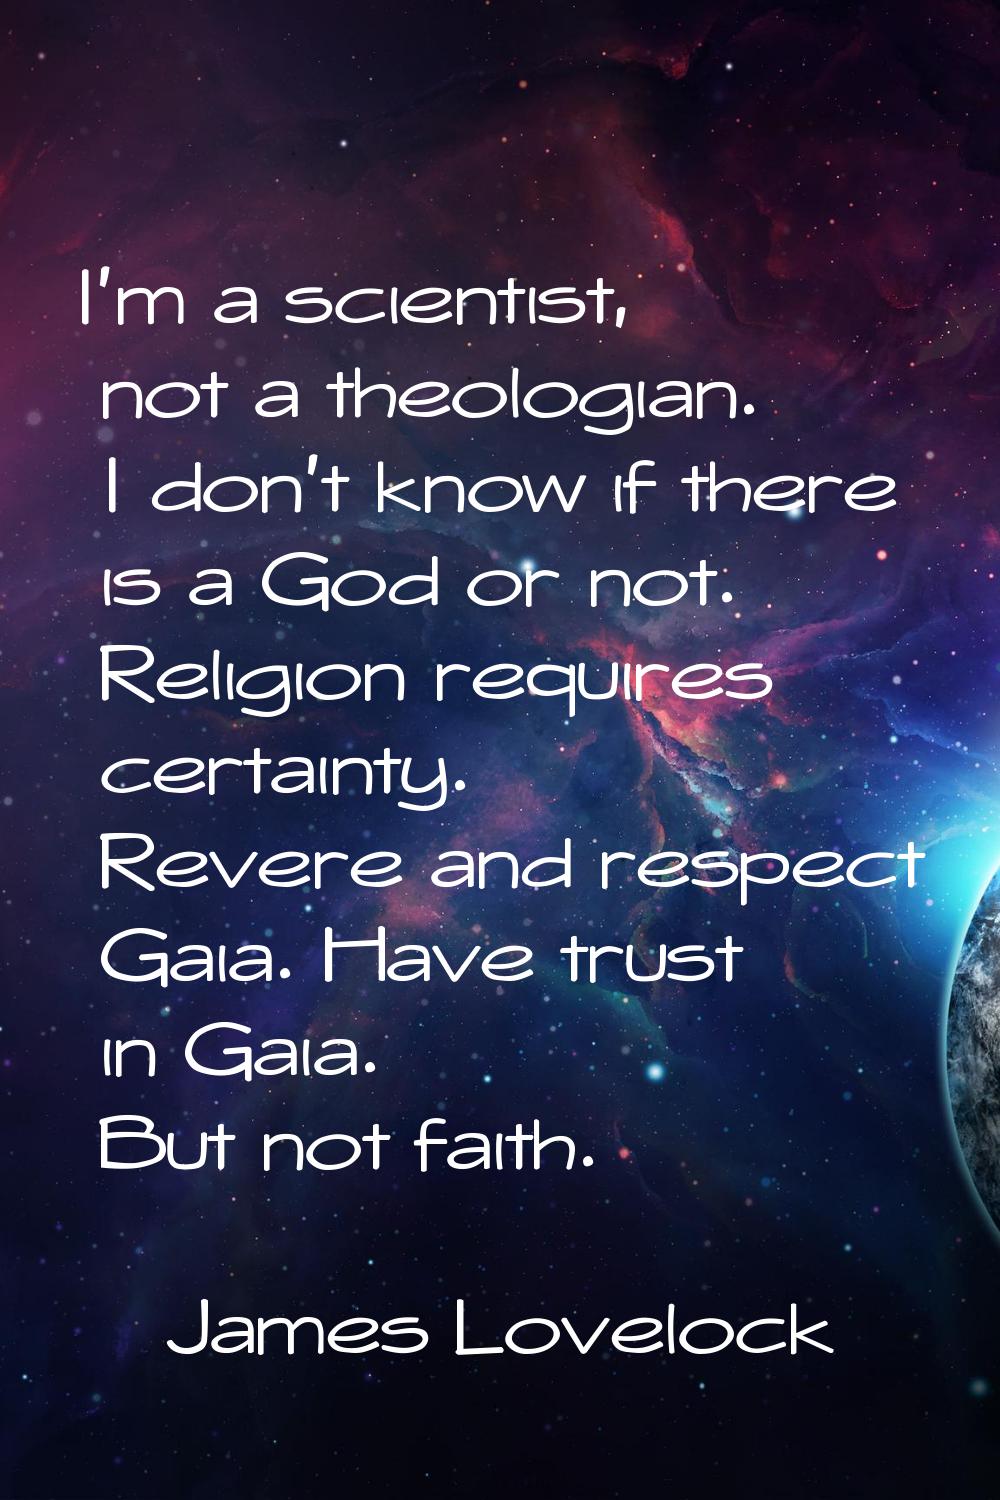 I'm a scientist, not a theologian. I don't know if there is a God or not. Religion requires certain